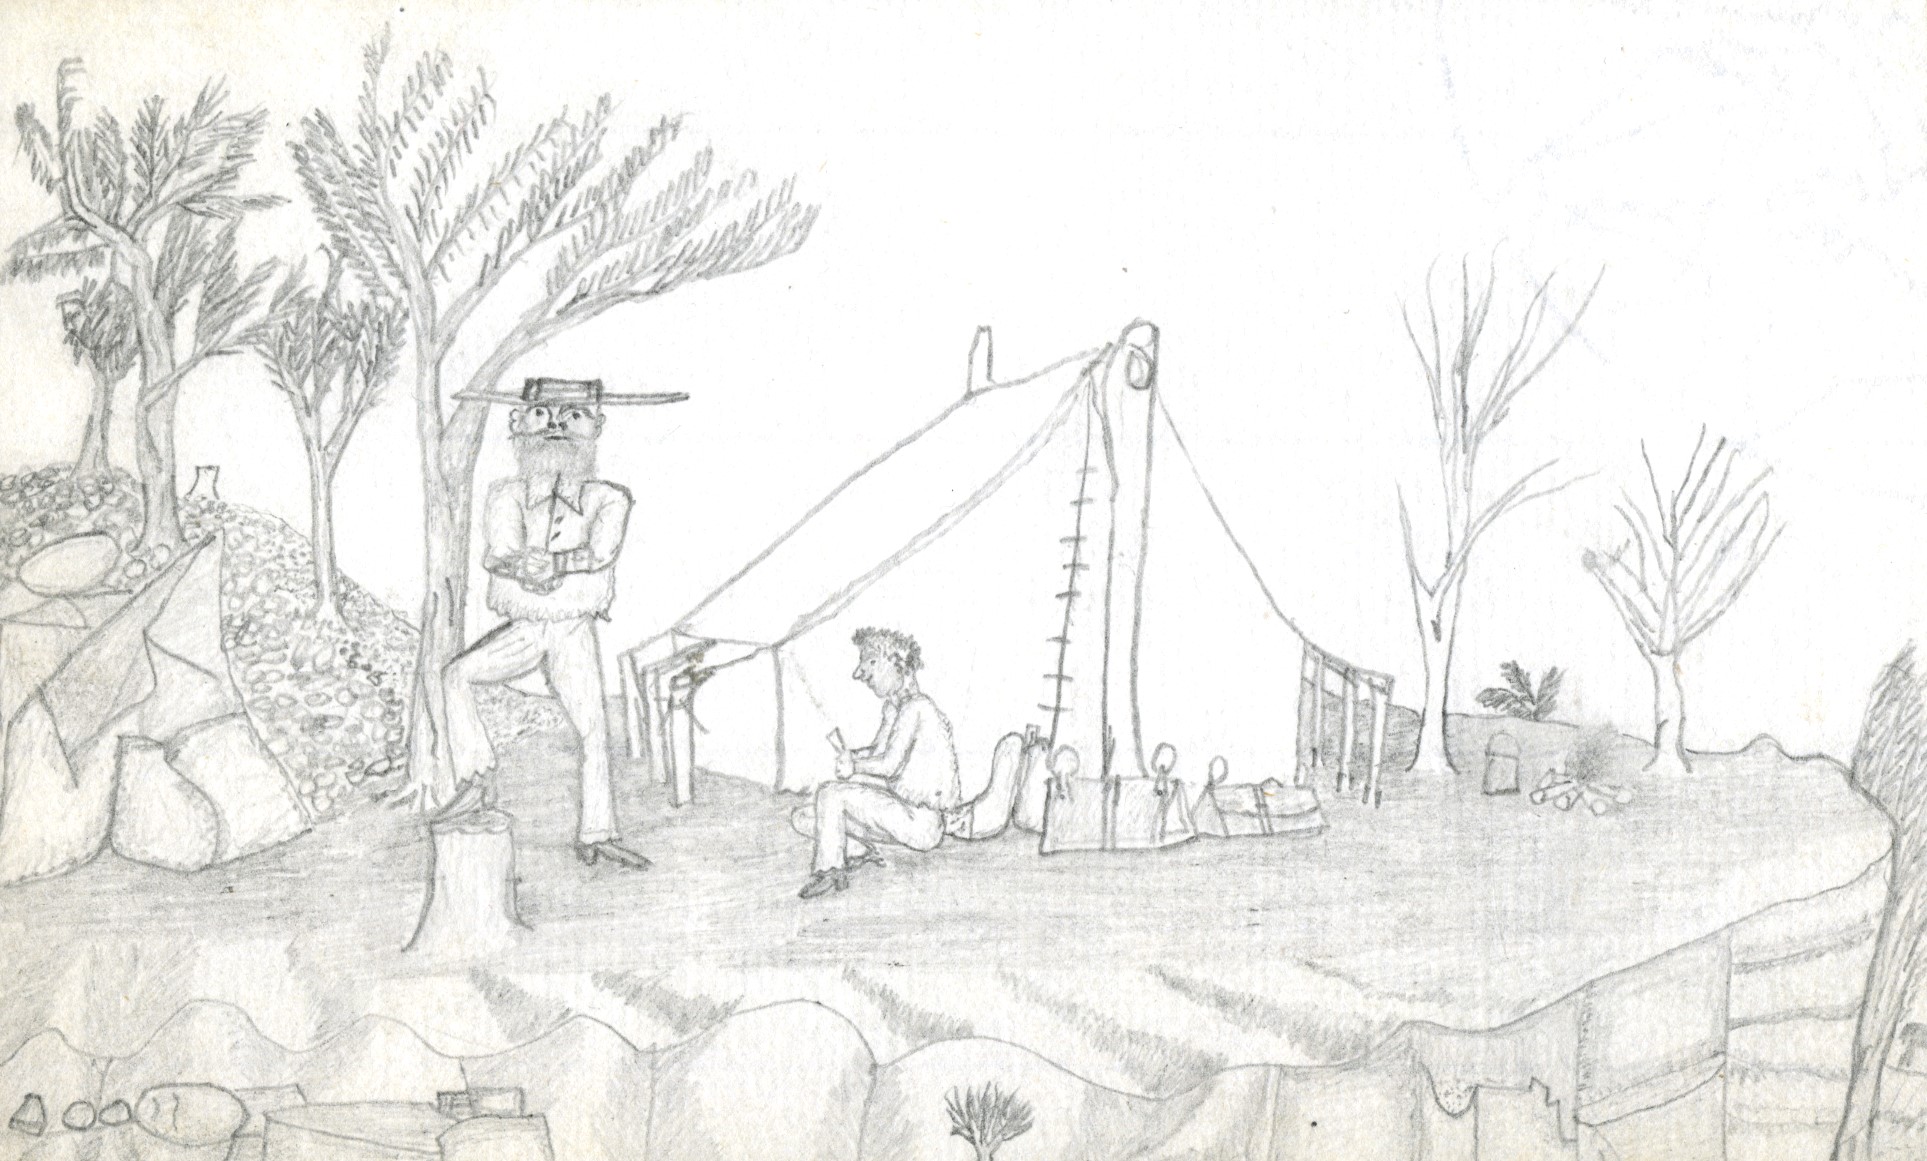 Drawn image of campsite with two men, a tent, and bush scenery